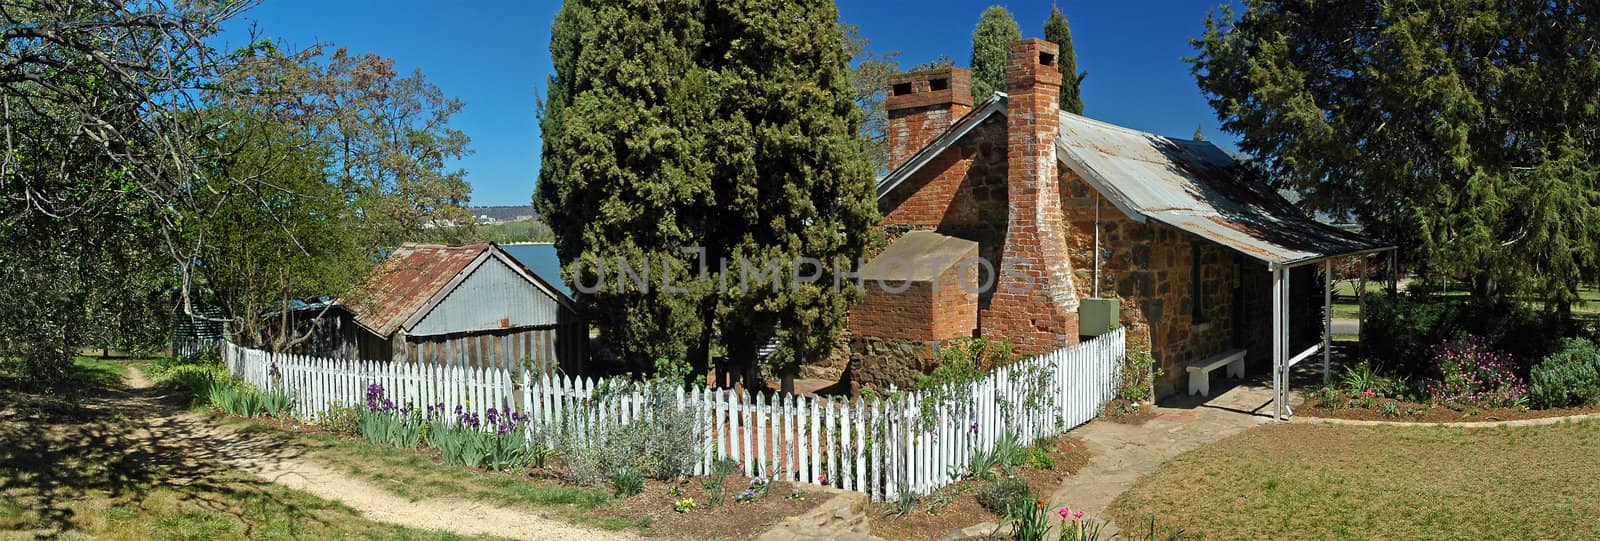 The historic Blundells' Cottage in Canberra, panorama photo